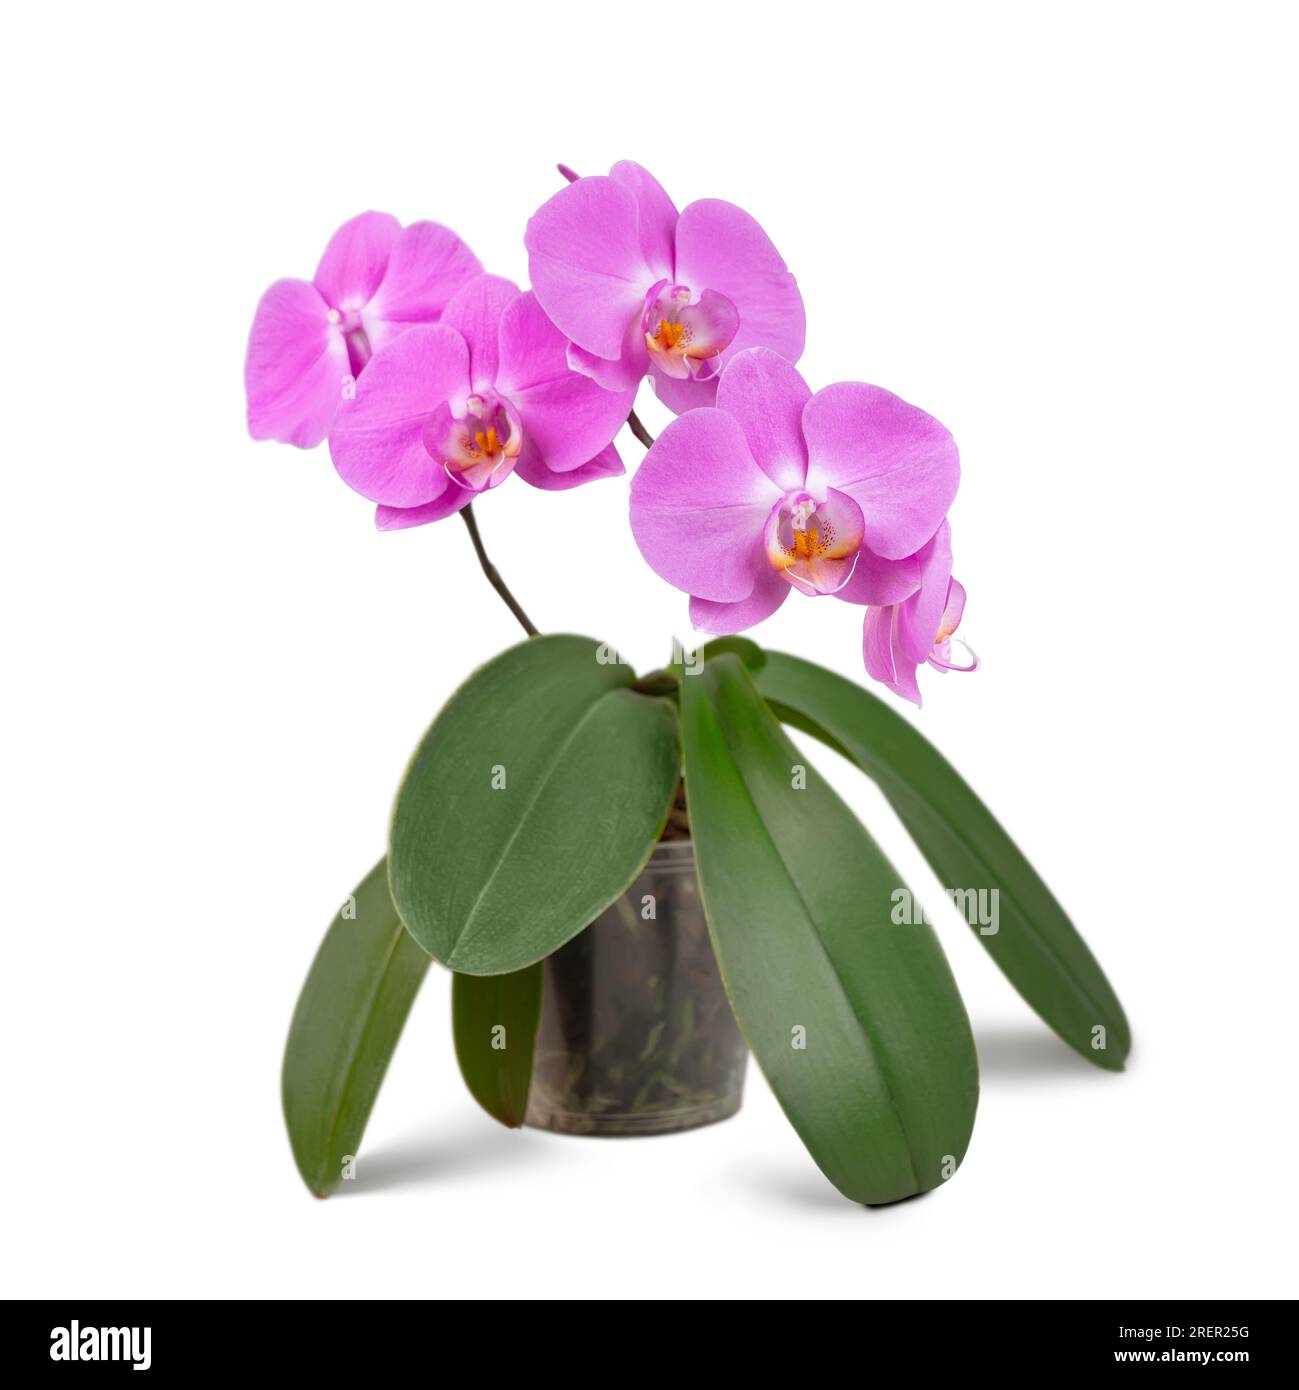 Beautiful tropical purple phalaenopsis, orchid flower with green leaves in pot isolated on white background. Floral, garden, hobby, home plants care. Stock Photo